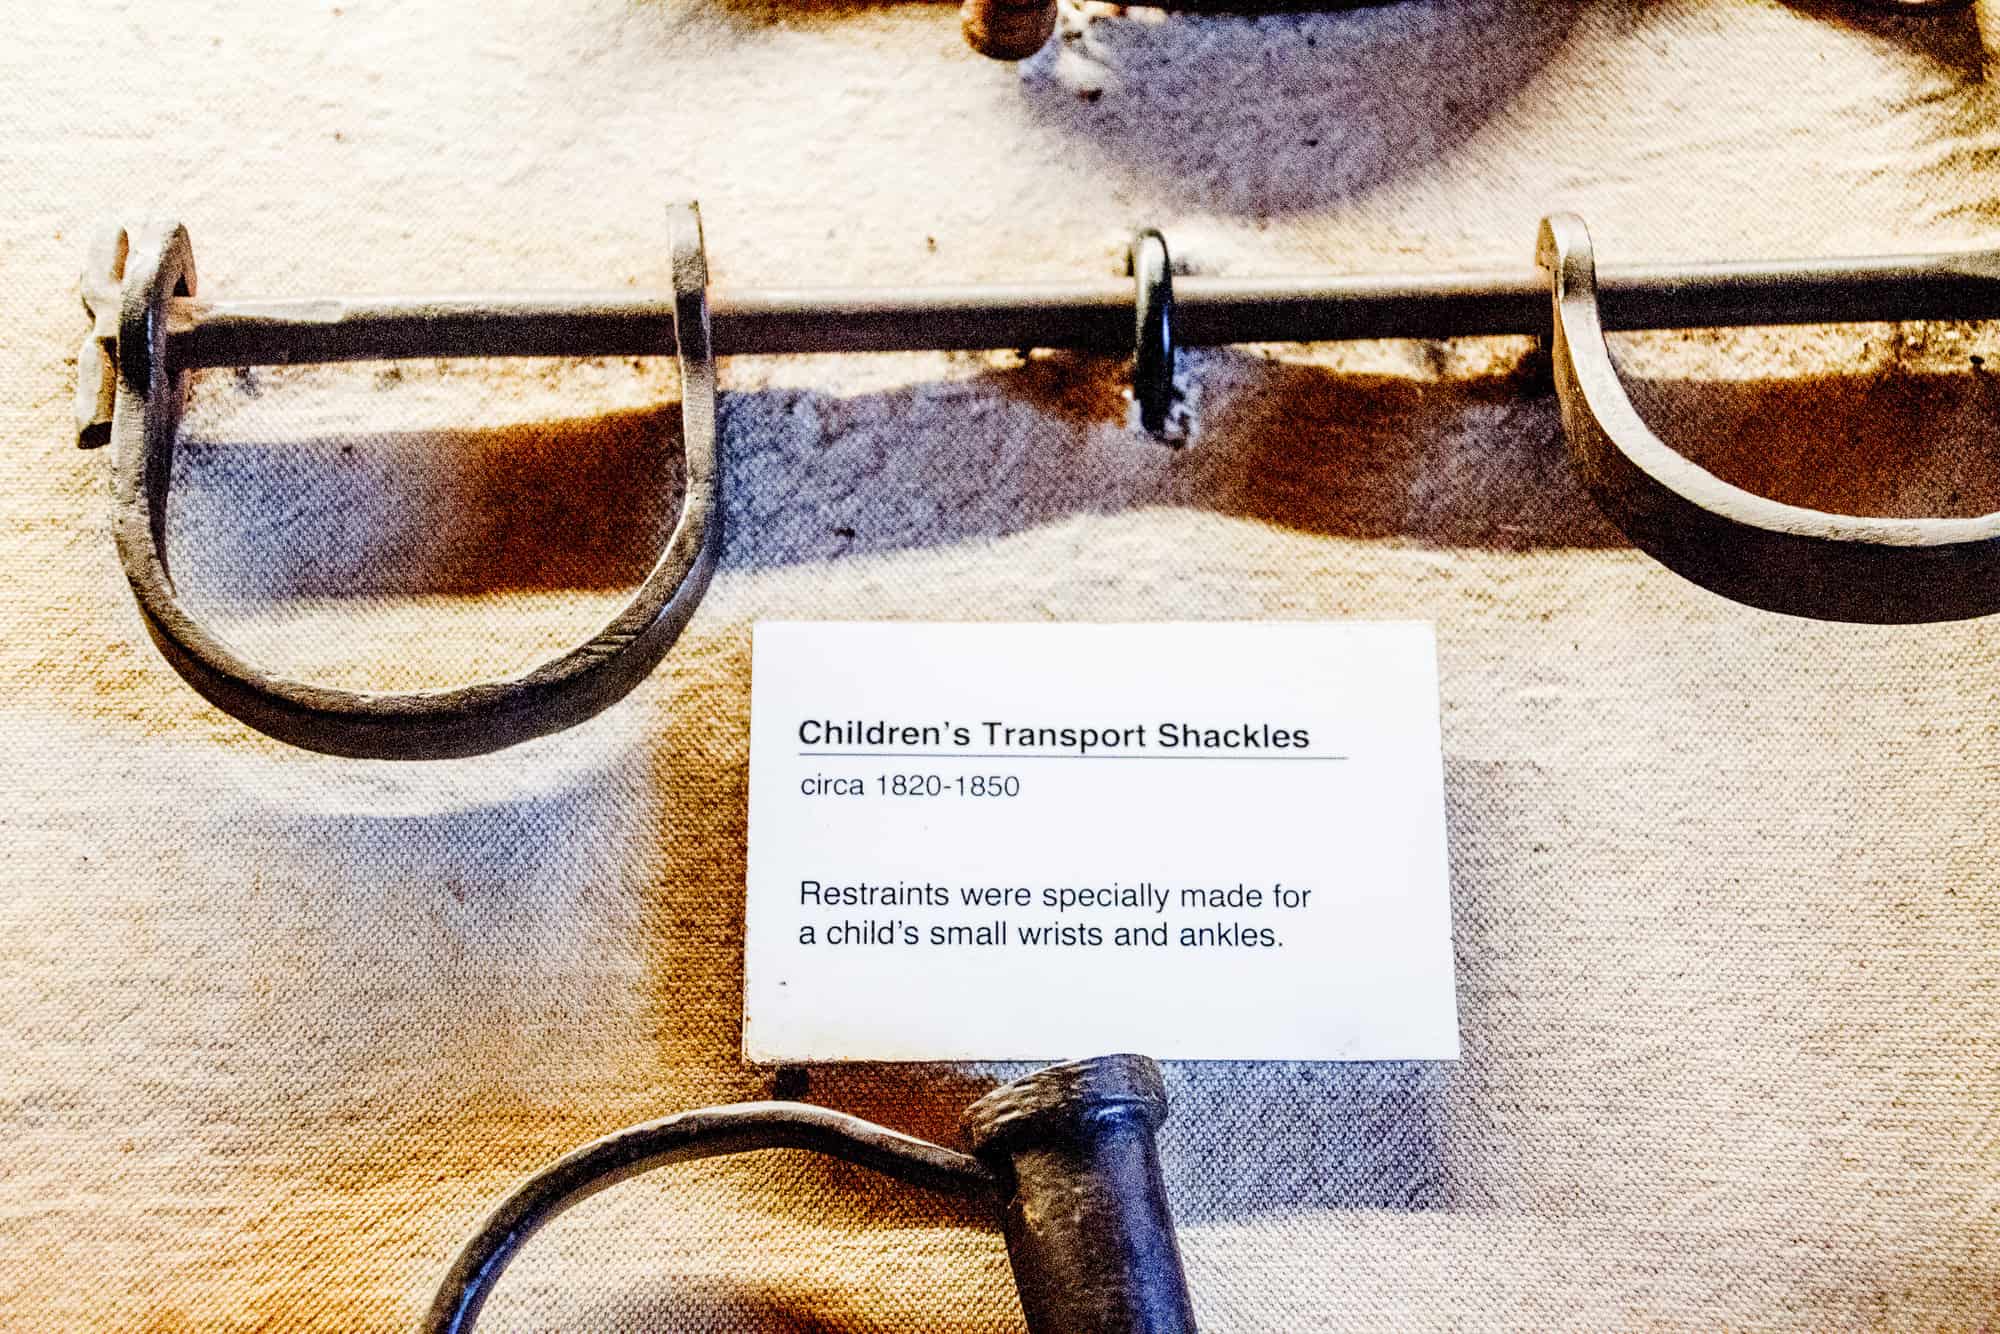 USA - Louisiana - Great River Road-Shackles for transporting children